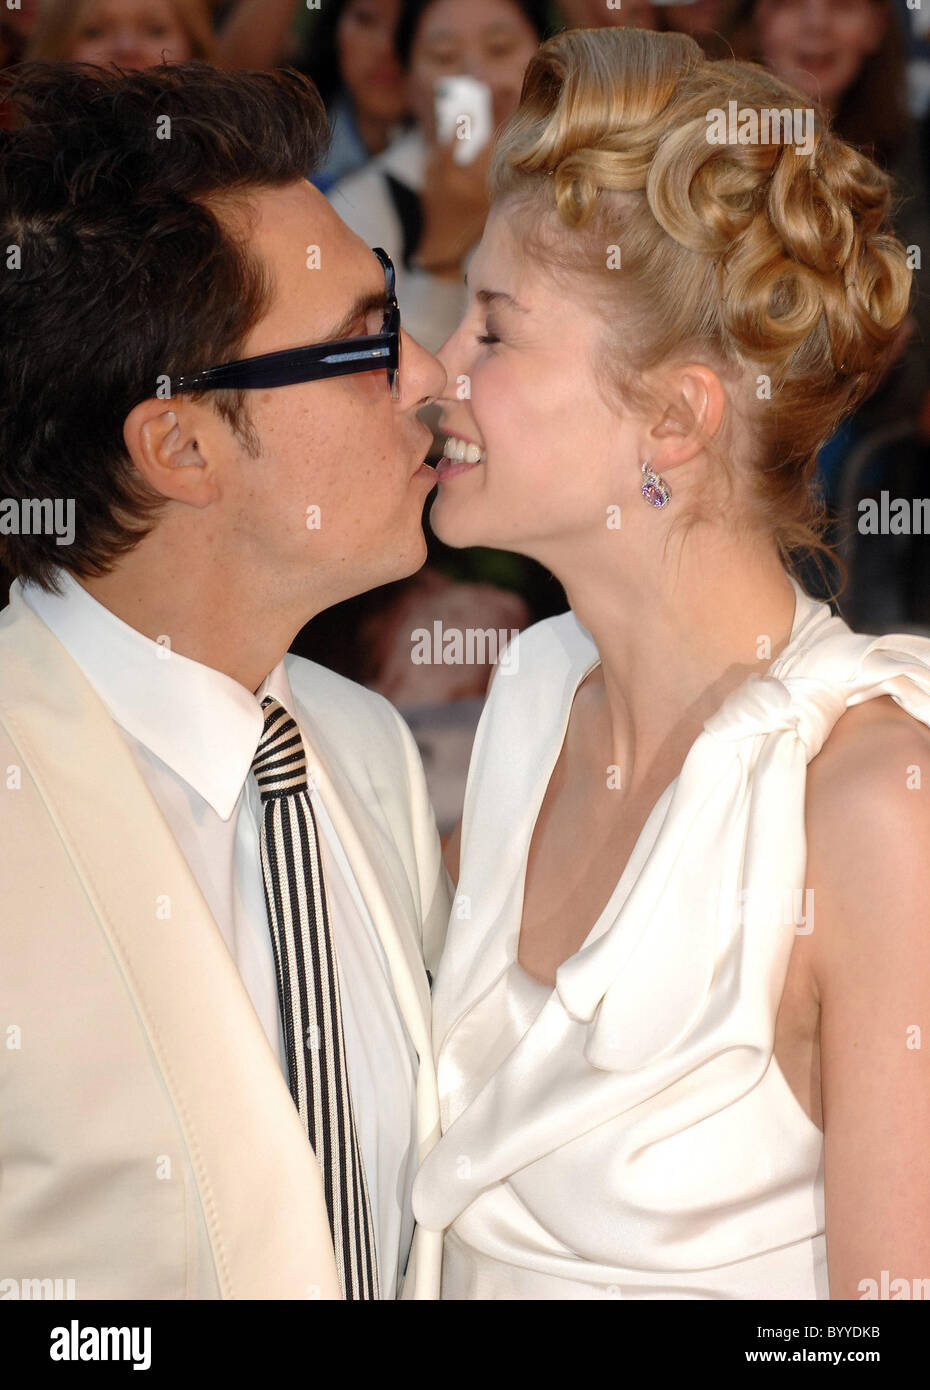 Joe Wright, Rosamund Pike UK Premiere of 'Atonement' held at the Odeon  Leicester Square - Arrivals London, England - 04.09.07 Stock Photo - Alamy